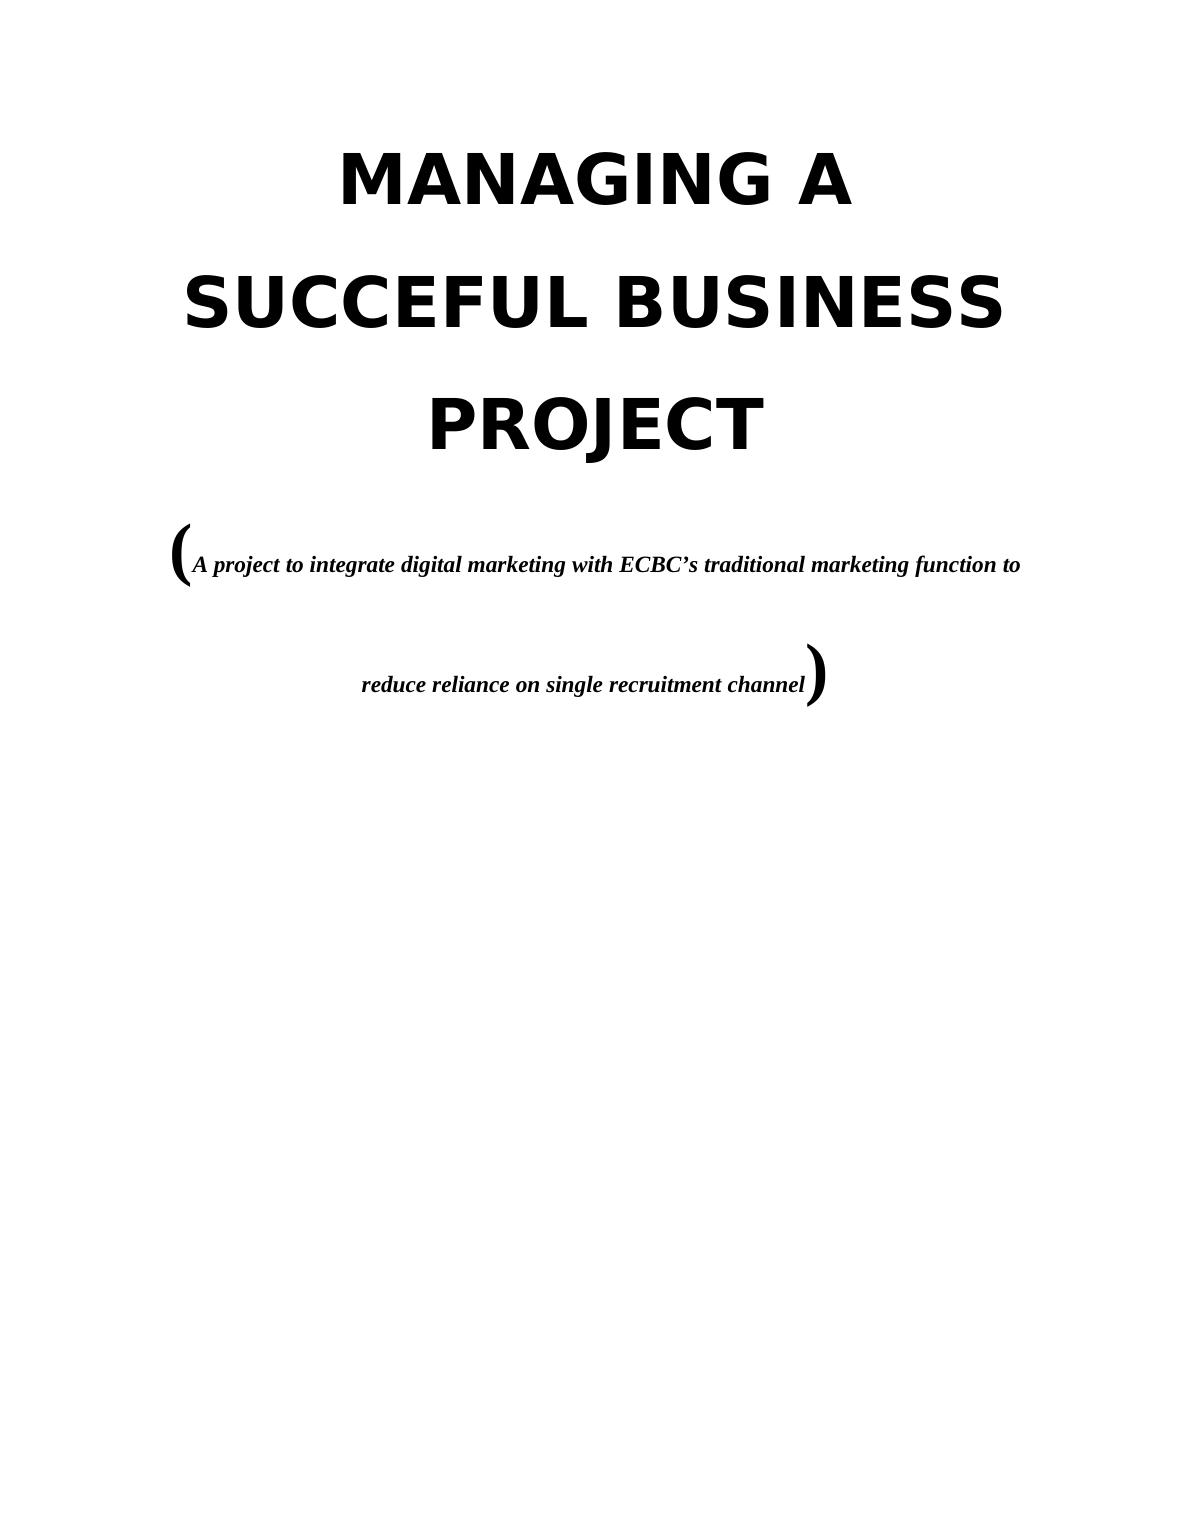 Managing Successful Business Project Assignment - East End Computing and Business College_1